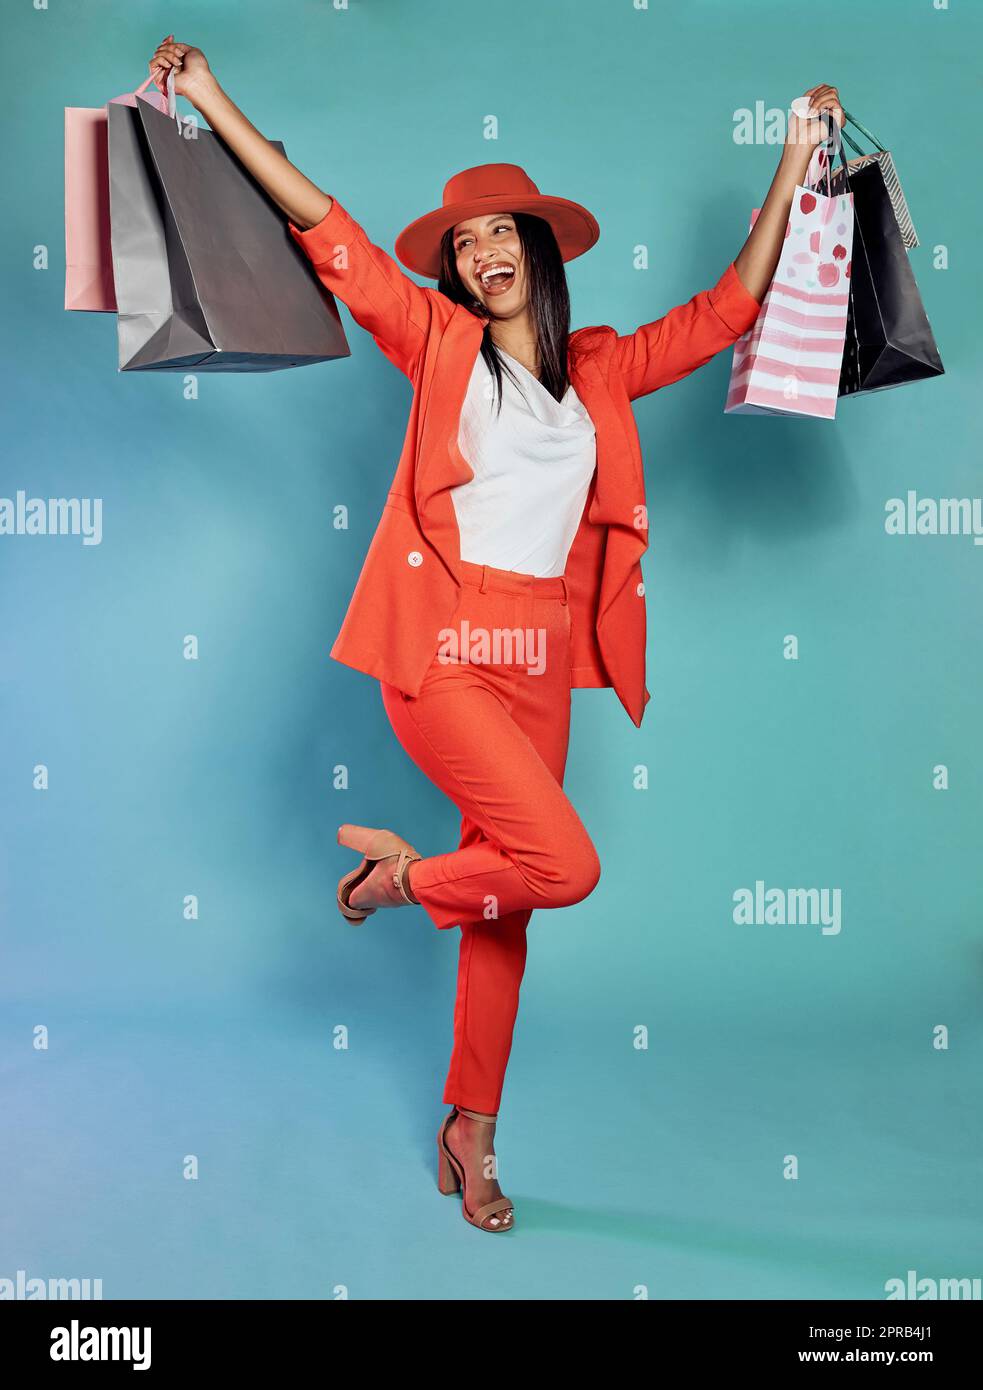 Excited and trendy woman with shopping bags after retail therapy, spending and buying clothes. Stylish, edgy and funky model holding gifts and wearing colorful, fashionable red suit while happy Stock Photo